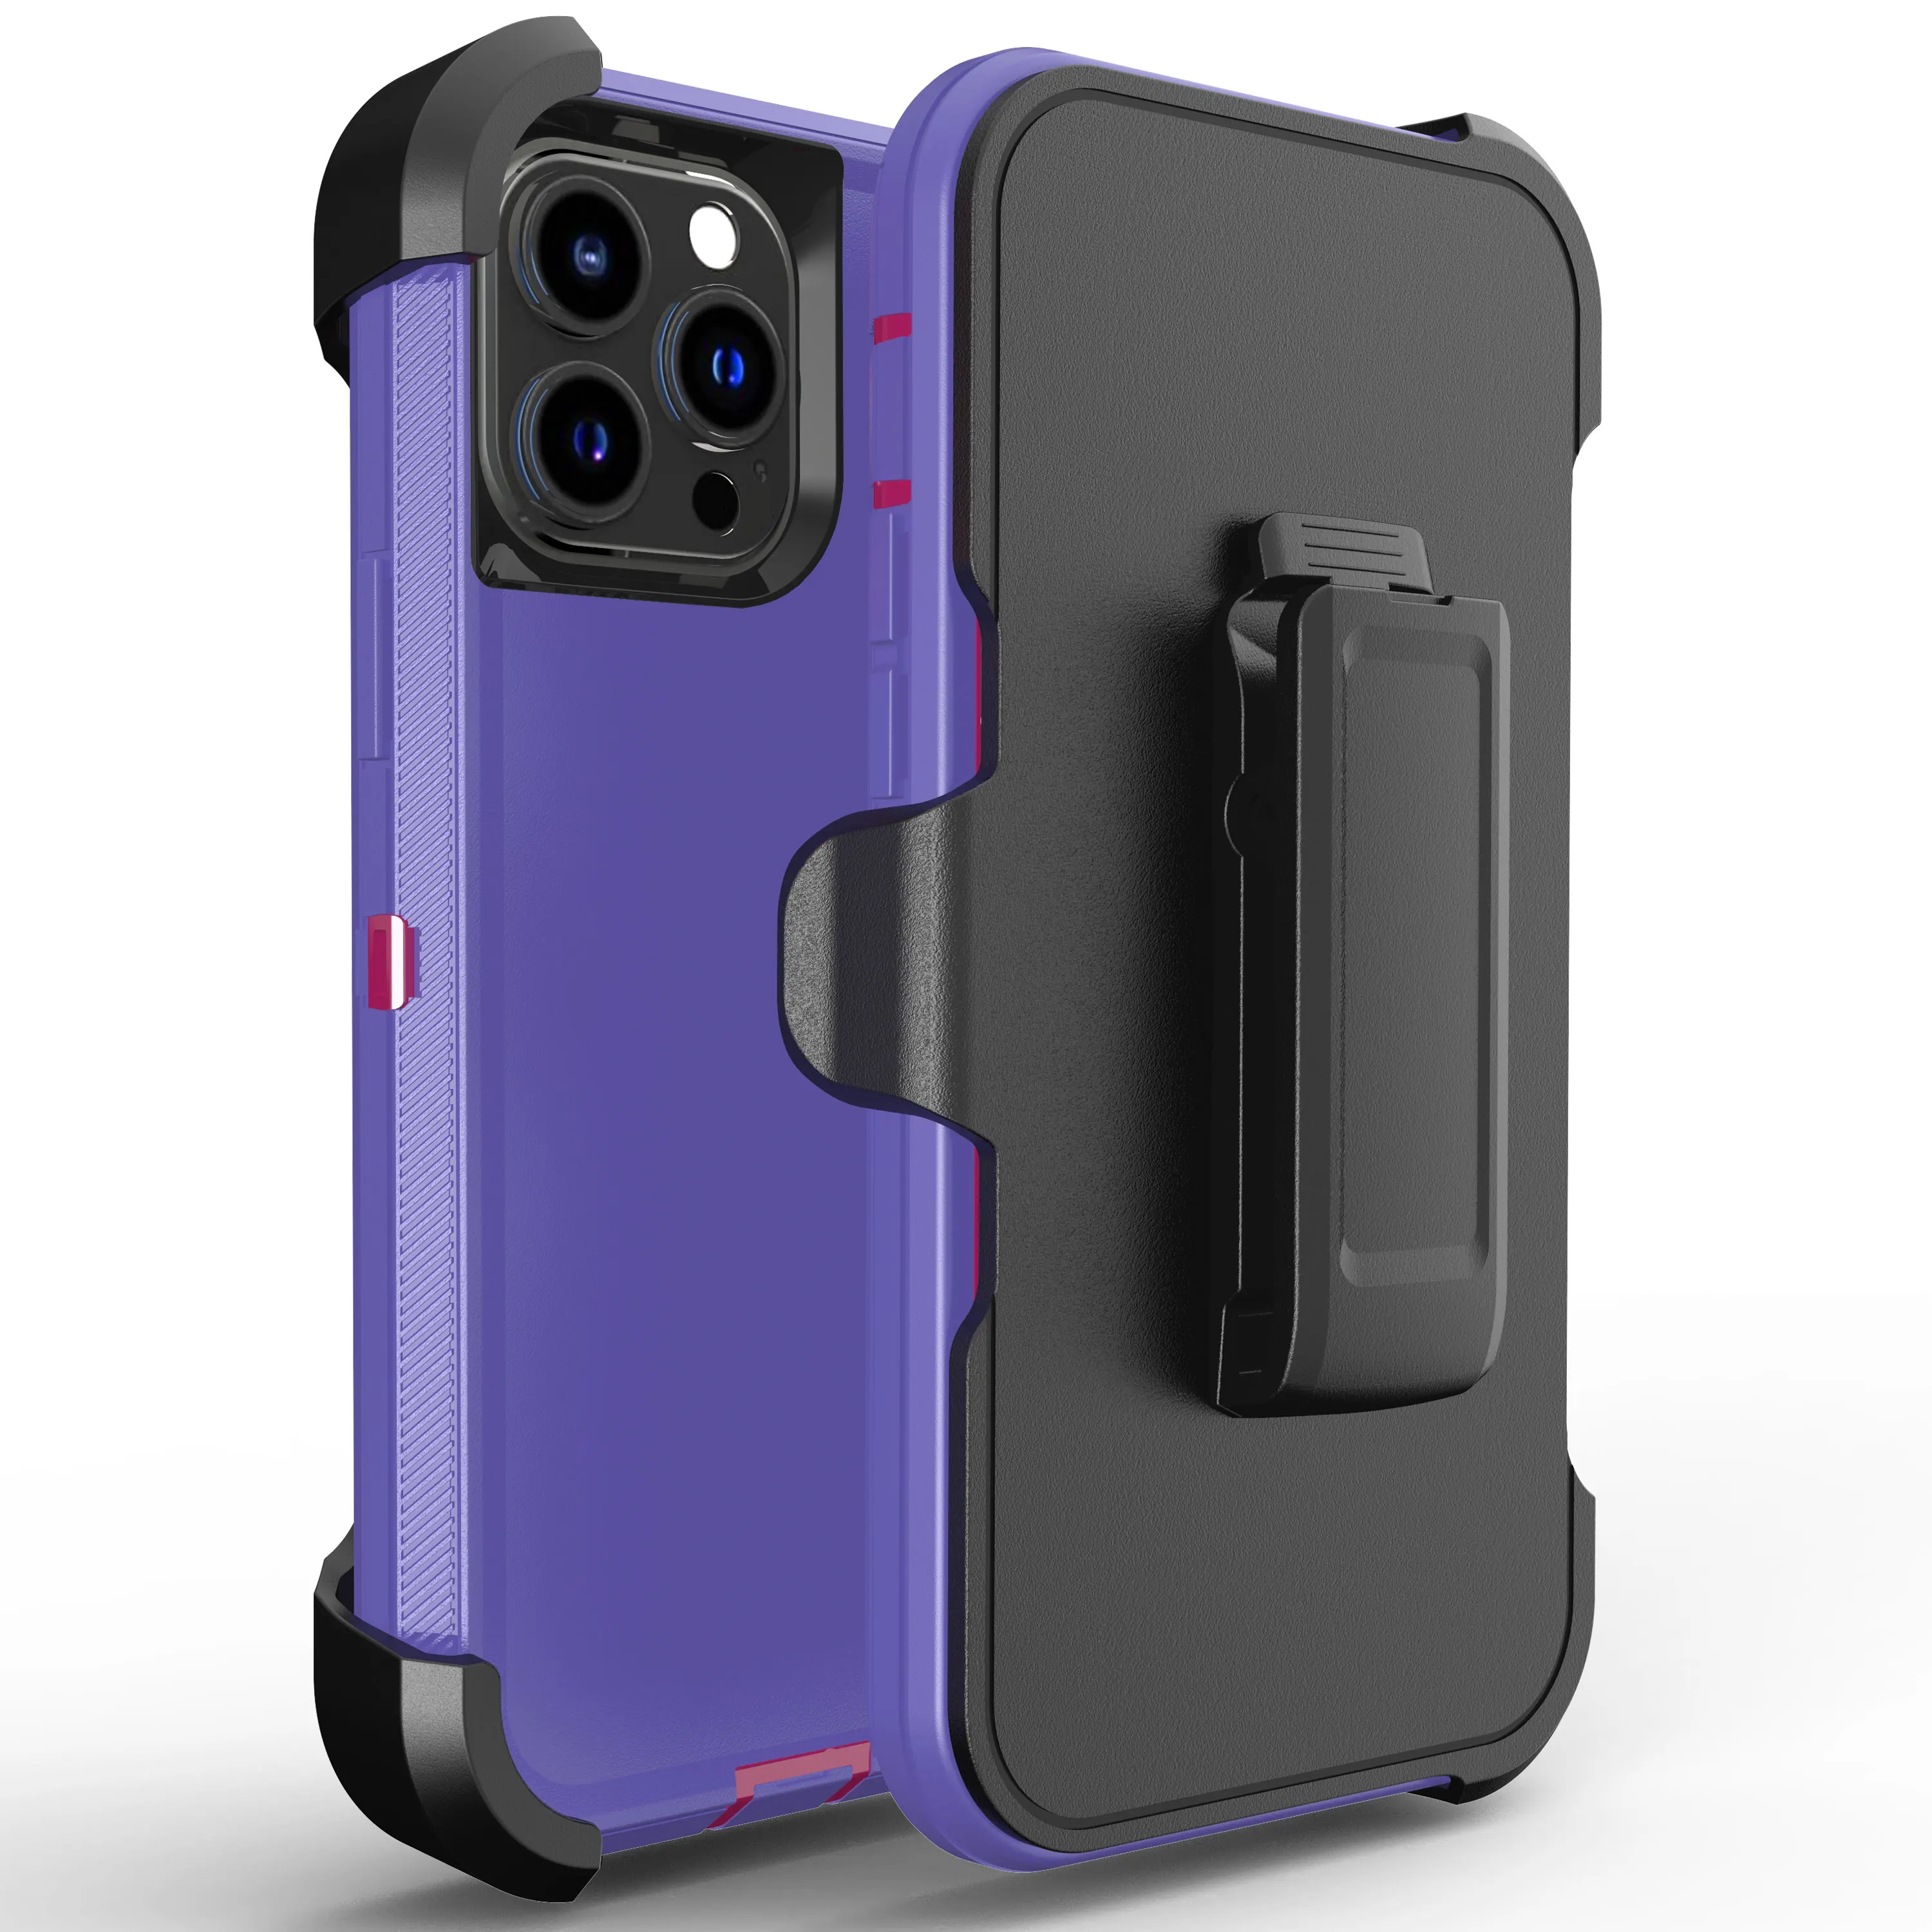 Original Heavy Duty Armor Case for iPhone 13 12 11 ProMax 3 in 1 Shockproof Case + Belt Clip for iPhone XS Max XR 6S 7P 8P moto g play case